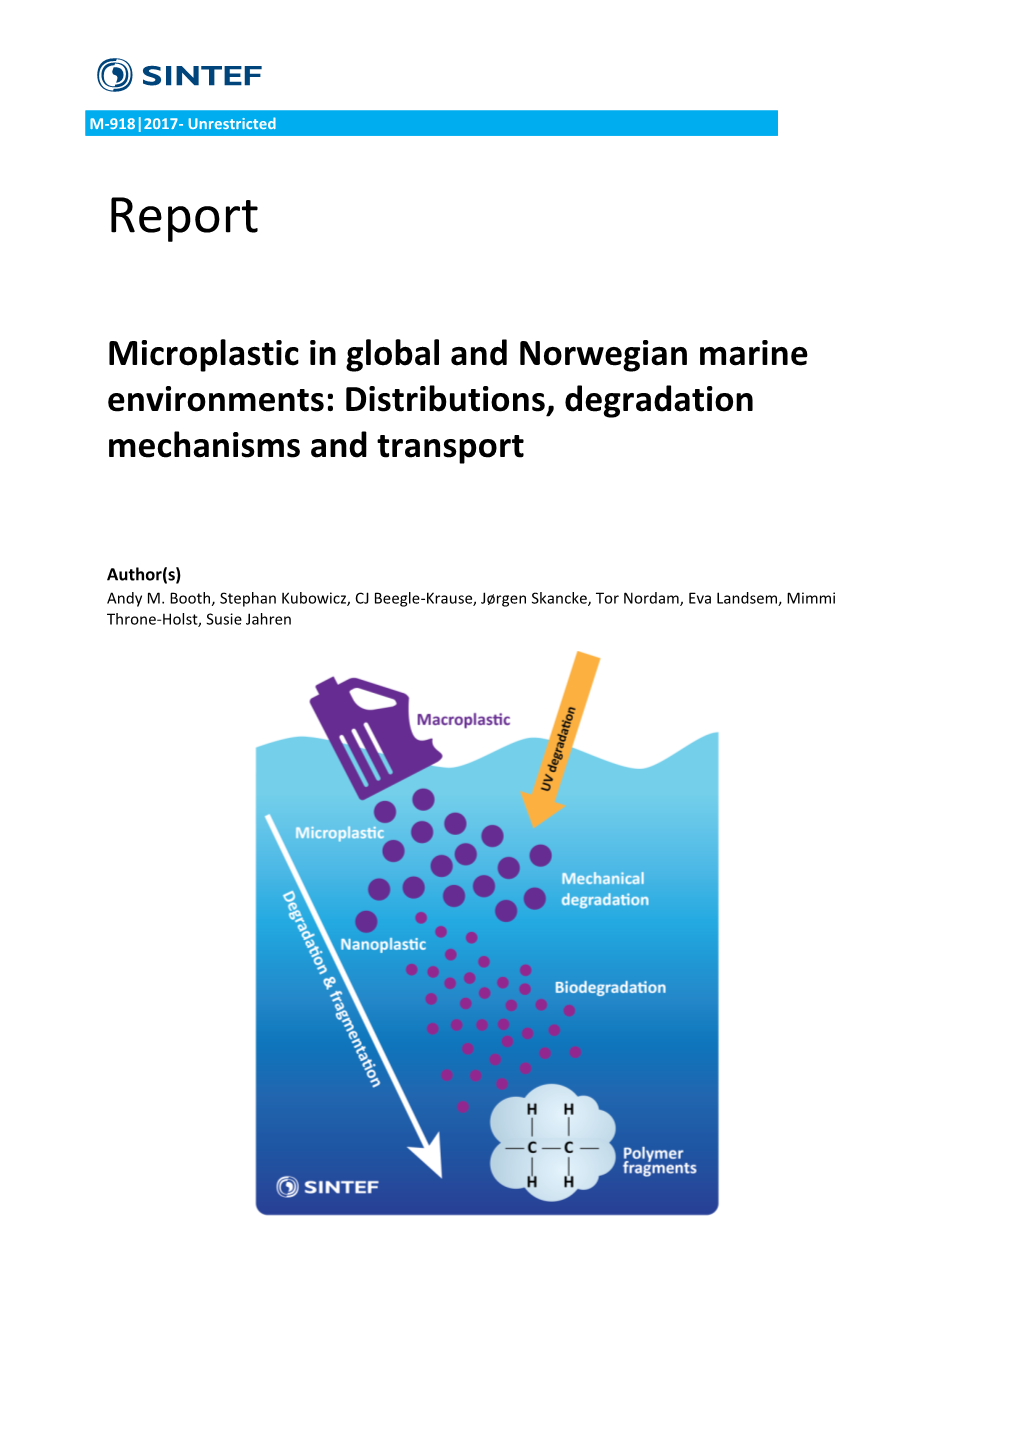 Microplastic in Global and Norwegian Marine Environments: Distributions, Degradation Mechanisms and Transport